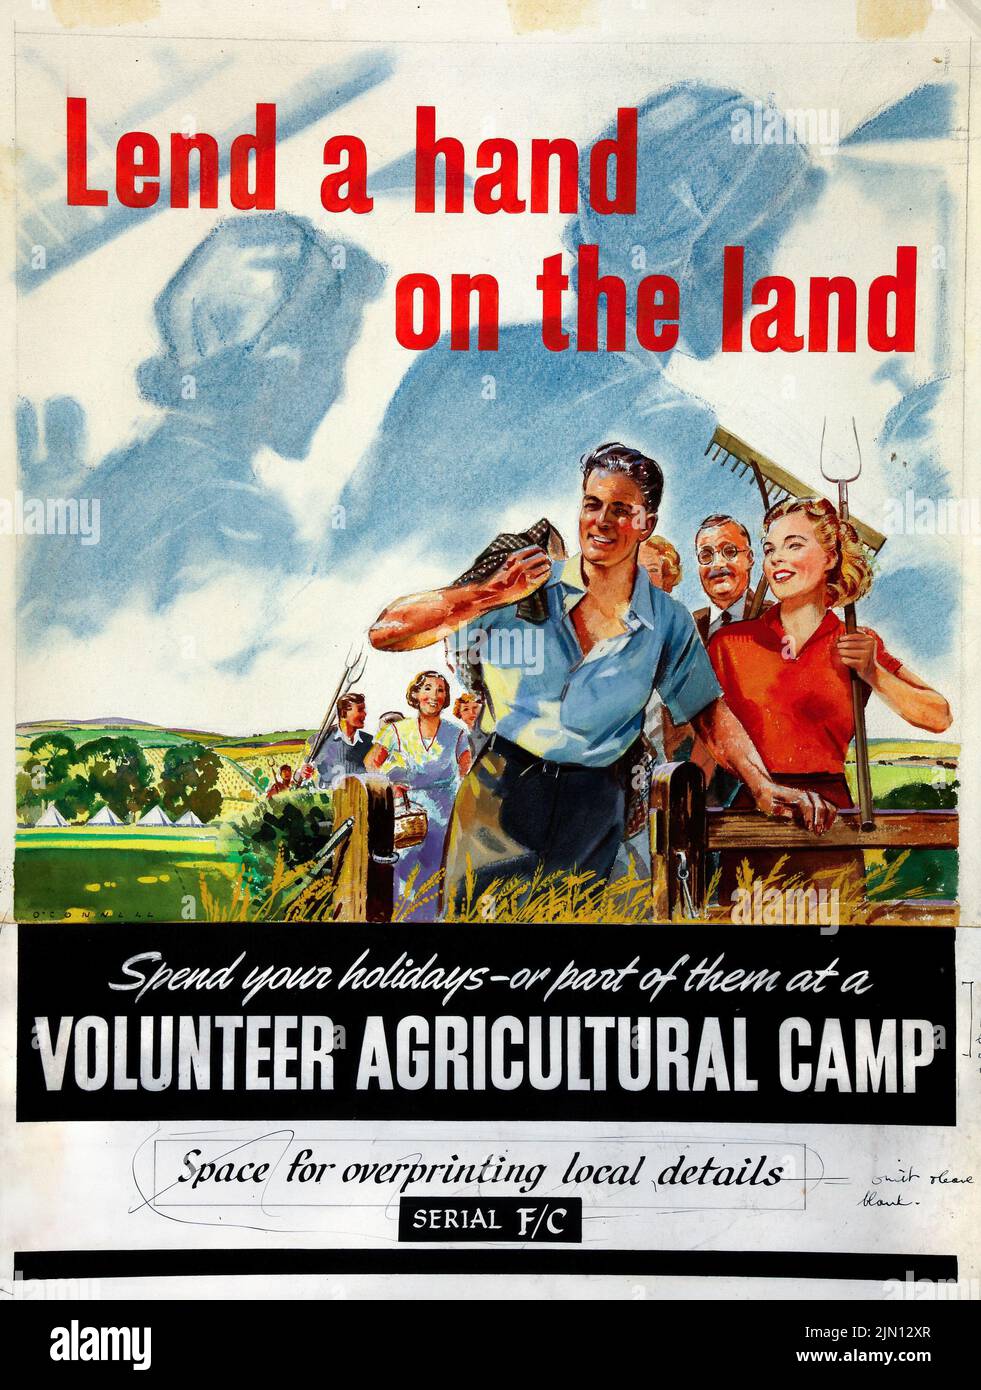 Lend a hand on the land. Spend your holidays – or part of them at a Volunteer Agricultural Camp (1939-1946) British World War II era poster by O'Connell Stock Photo